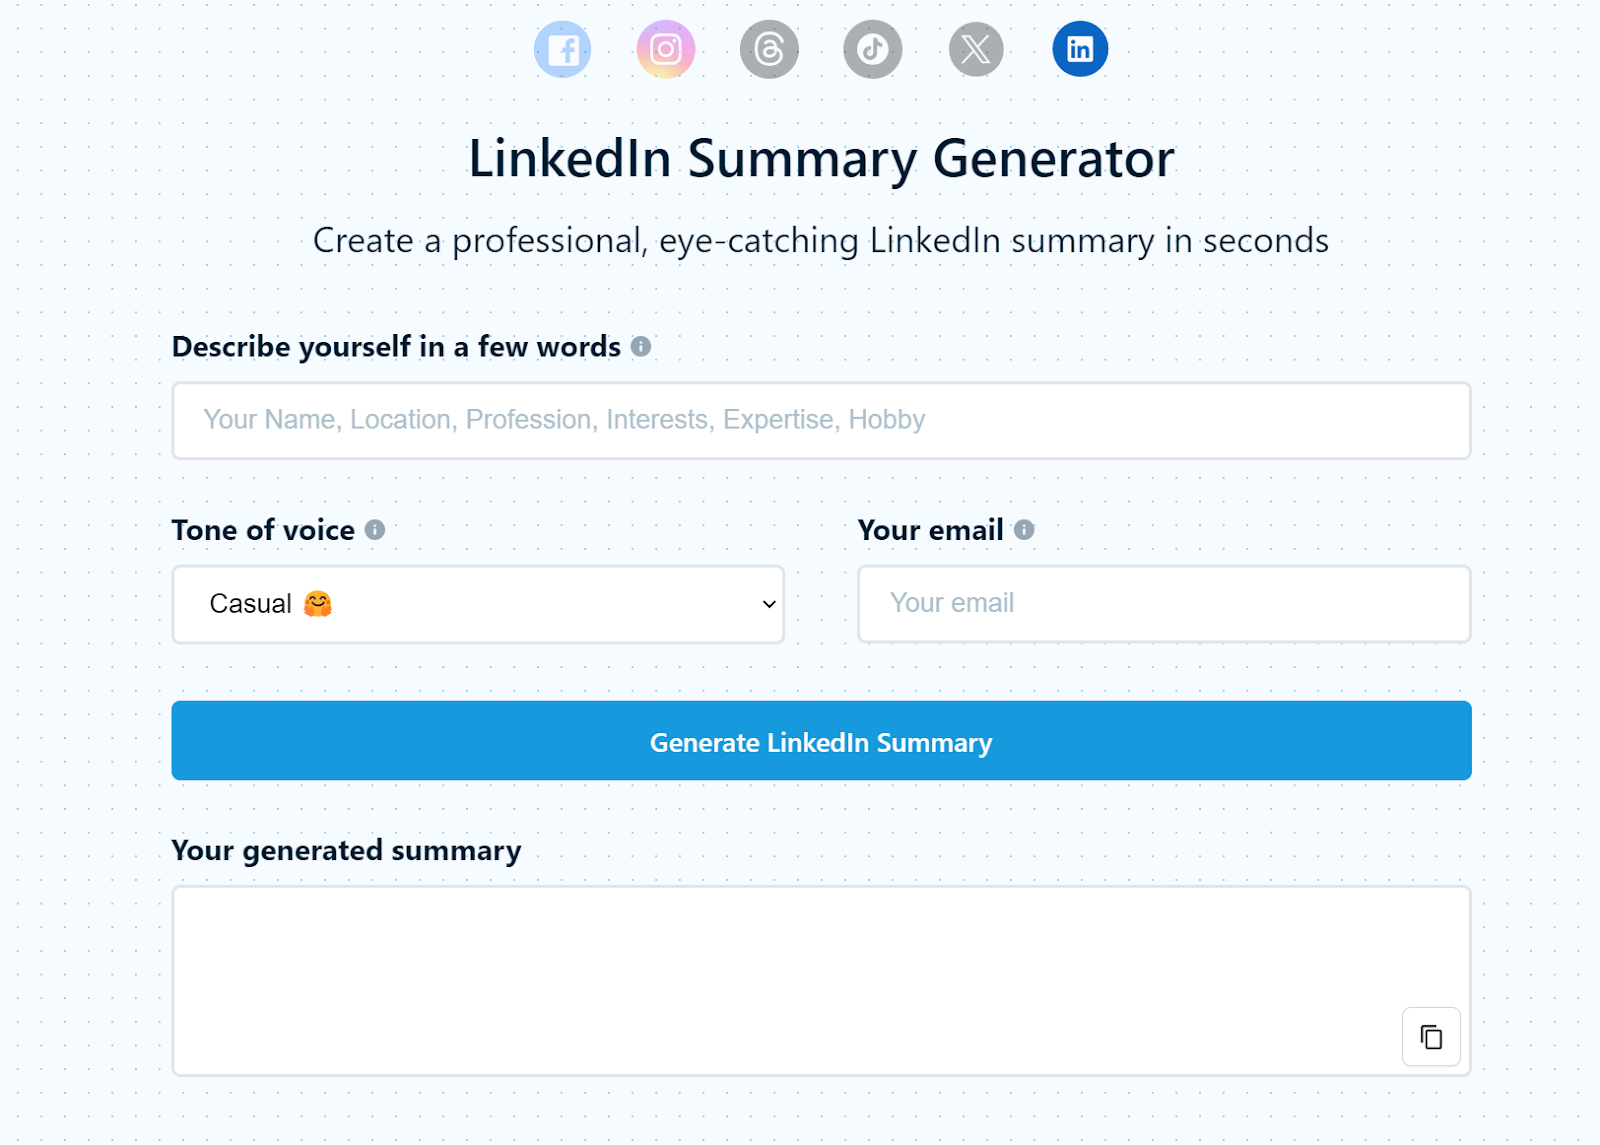 Mention - most popular and easy-to-use LinkedIn summary generators